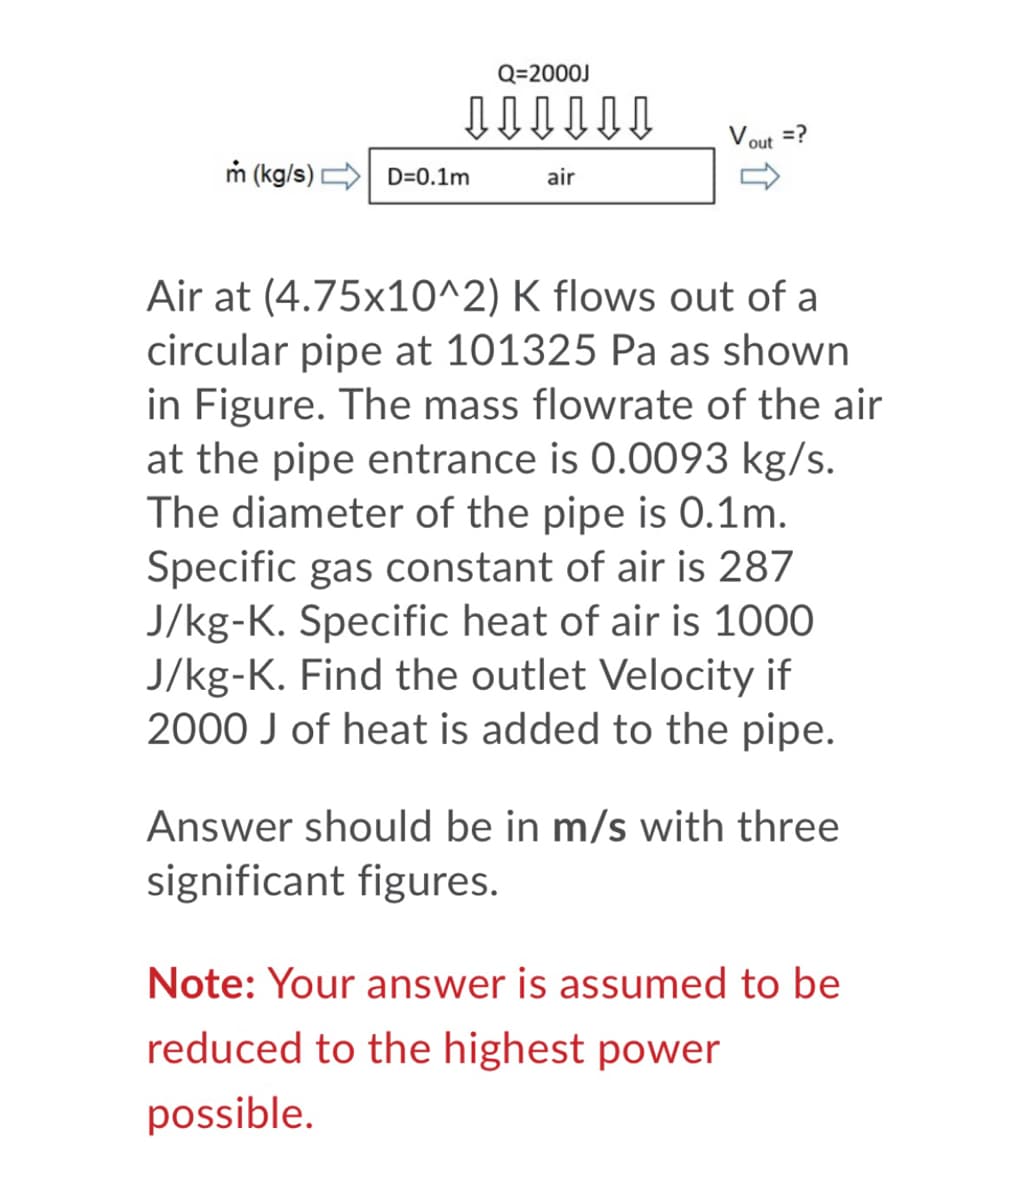 Q=2000J
=?
out
m (kg/s) D=0.1m
air
Air at (4.75x10^2) K flows out of a
circular pipe at 101325 Pa as shown
in Figure. The mass flowrate of the air
at the pipe entrance is 0.0093 kg/s.
The diameter of the pipe is 0.1m.
Specific gas constant of air is 287
J/kg-K. Specific heat of air is 1000
J/kg-K. Find the outlet Velocity if
2000 J of heat is added to the pipe.
Answer should be in m/s with three
significant figures.
Note: Your answer is assumed to be
reduced to the highest power
possible.
